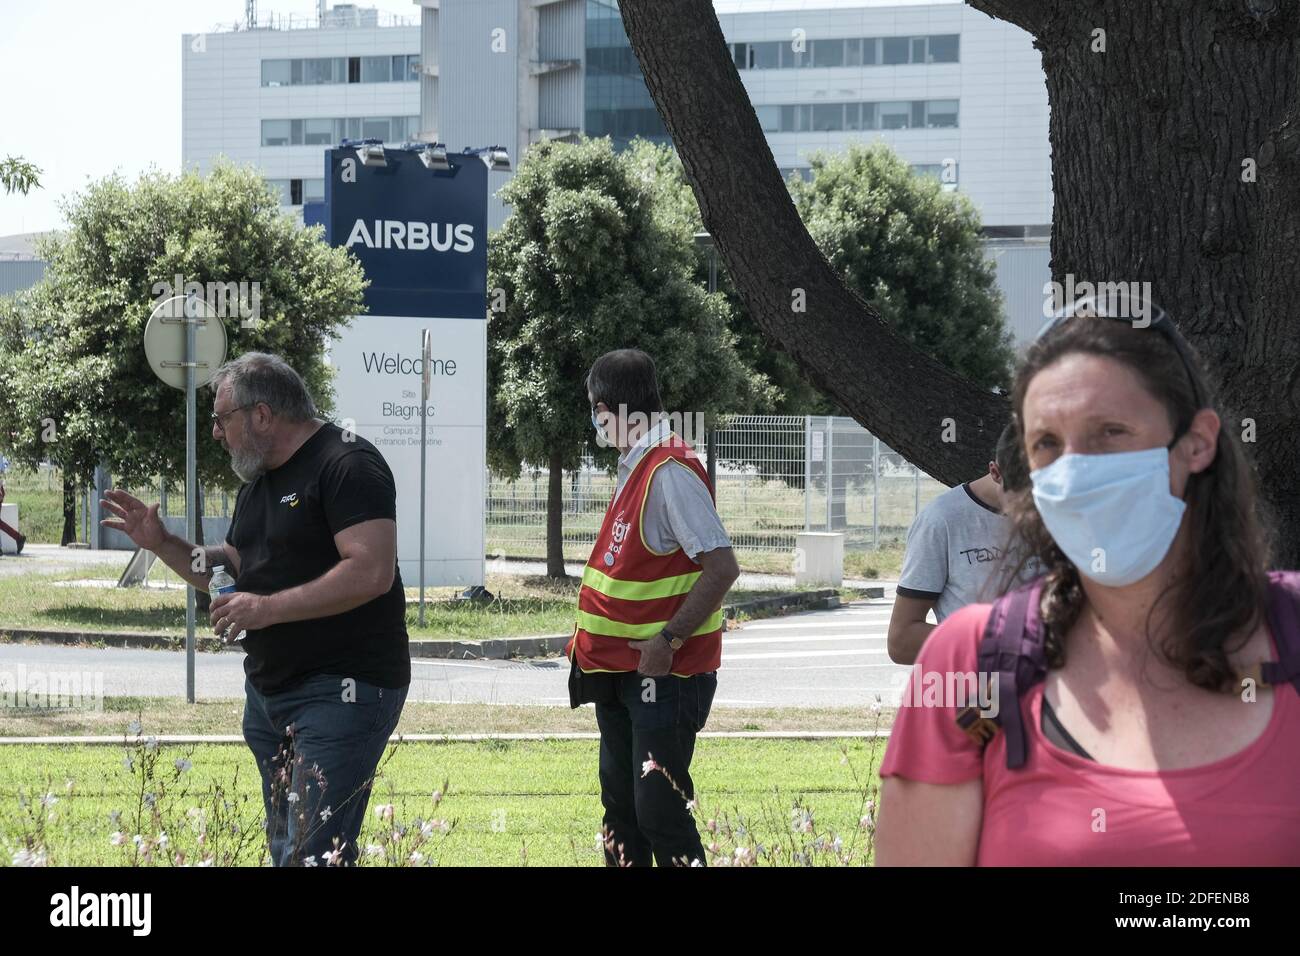 Aibus logo and demonstrators. In Toulouse (France), Airbus employees and its subcontractors demonstrated, on July 9, 2020, at the call of the left wing union CGT. Concerned about plans for layoffs in preparation, they thus intended to protest against the austerity measures of the major aeronautical groups. Political supporters joined the march. Photo by Patrick Batard/ABACAPRESS.COM Stock Photo